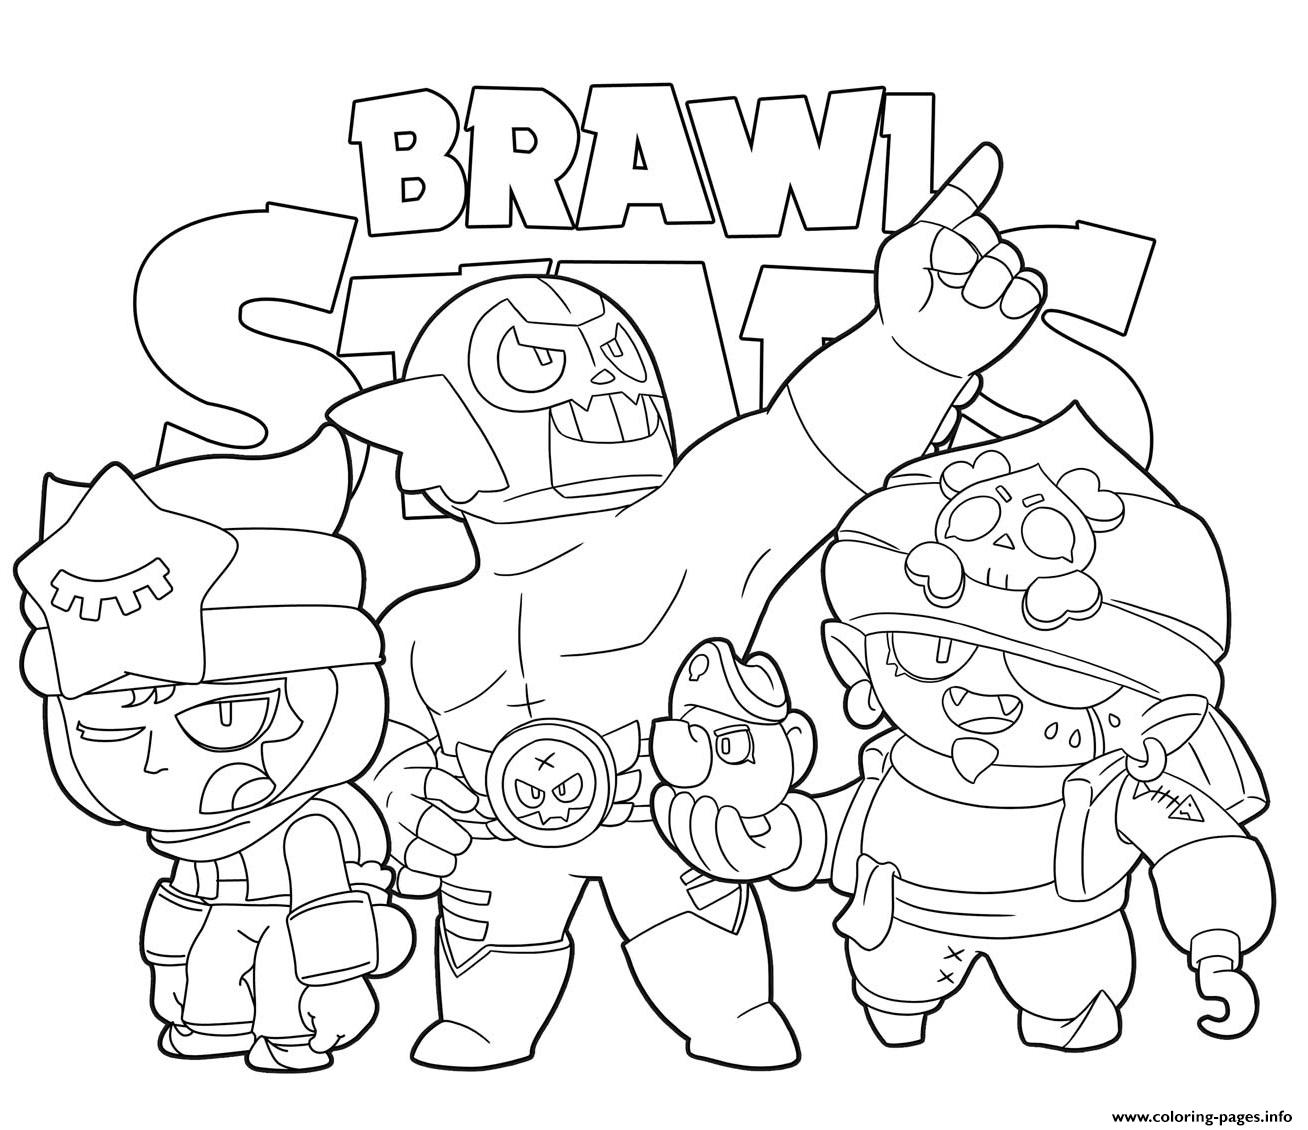 Pirate Sandy And El Rudo Coloring Pages Printable - coloriage brawl stars mortis truand